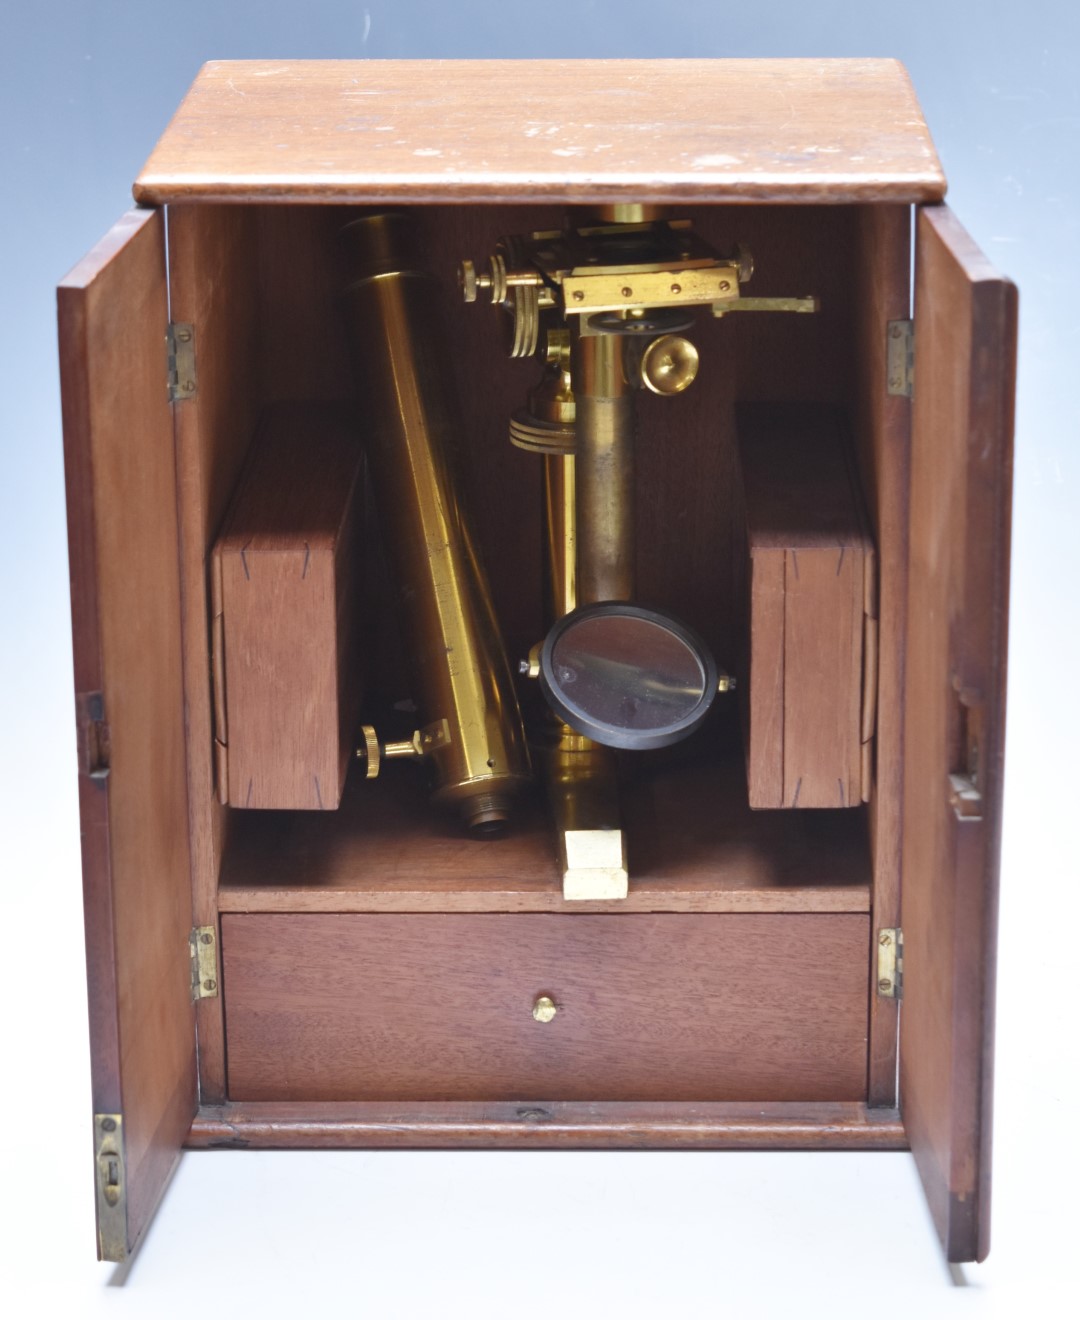 John Davis Derby 19thC brass microscope in mahogany case with two cases of slides and accessories